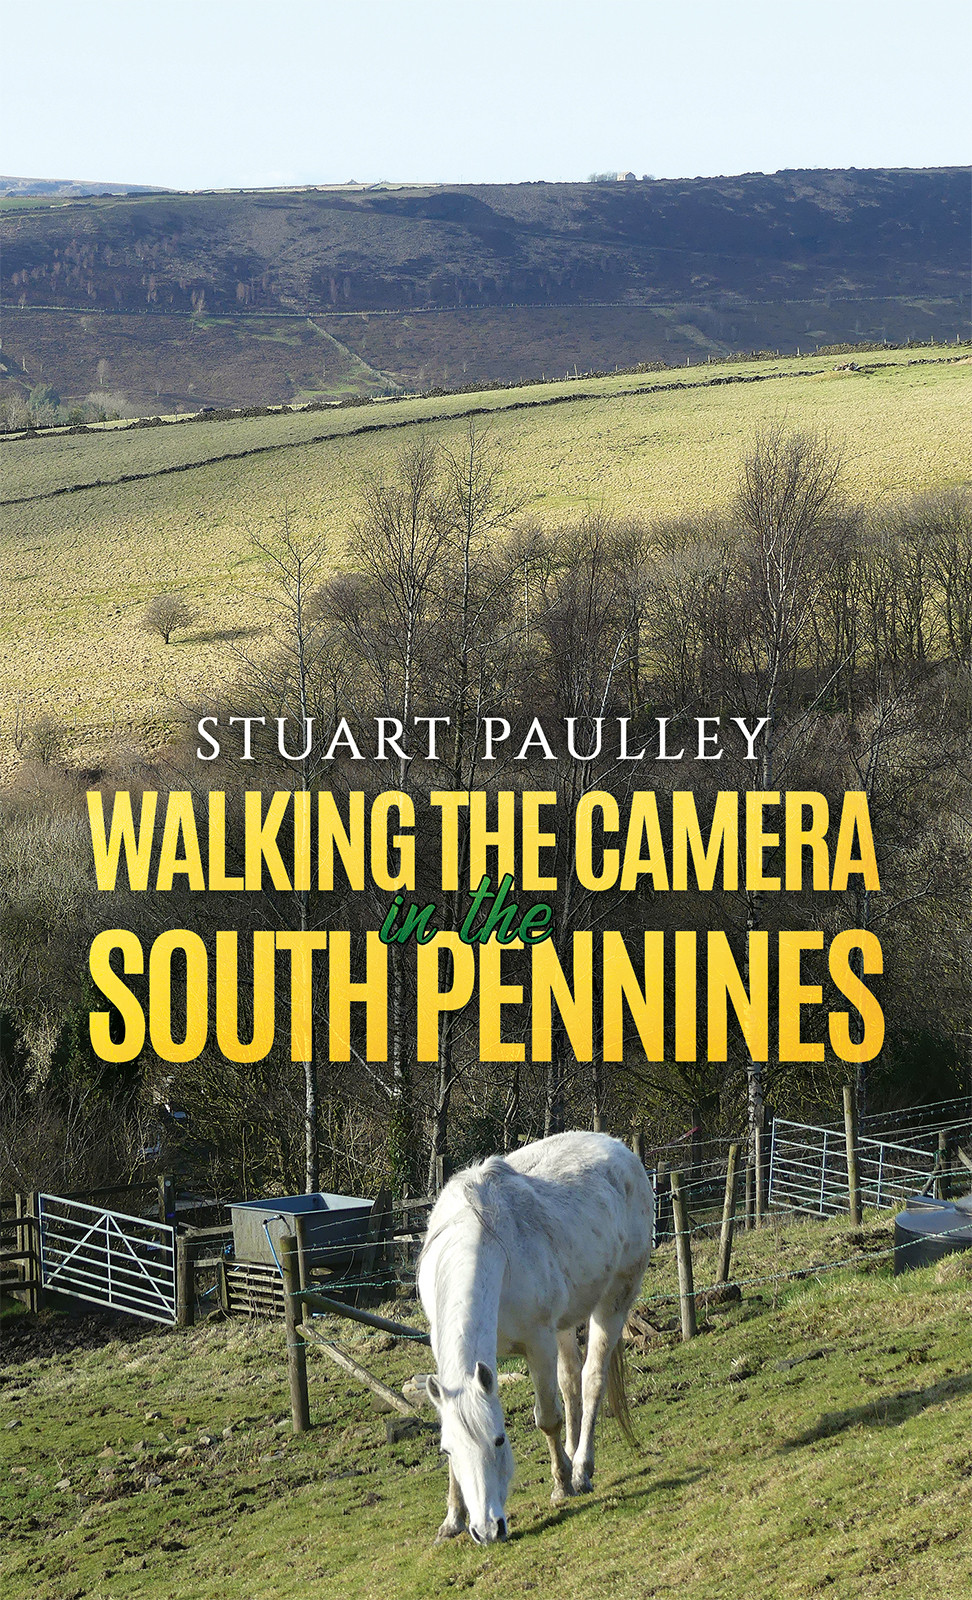 Title page of a book. A horse in a field, title Walking The Camera in the South Pennines by Stuart Paulley.